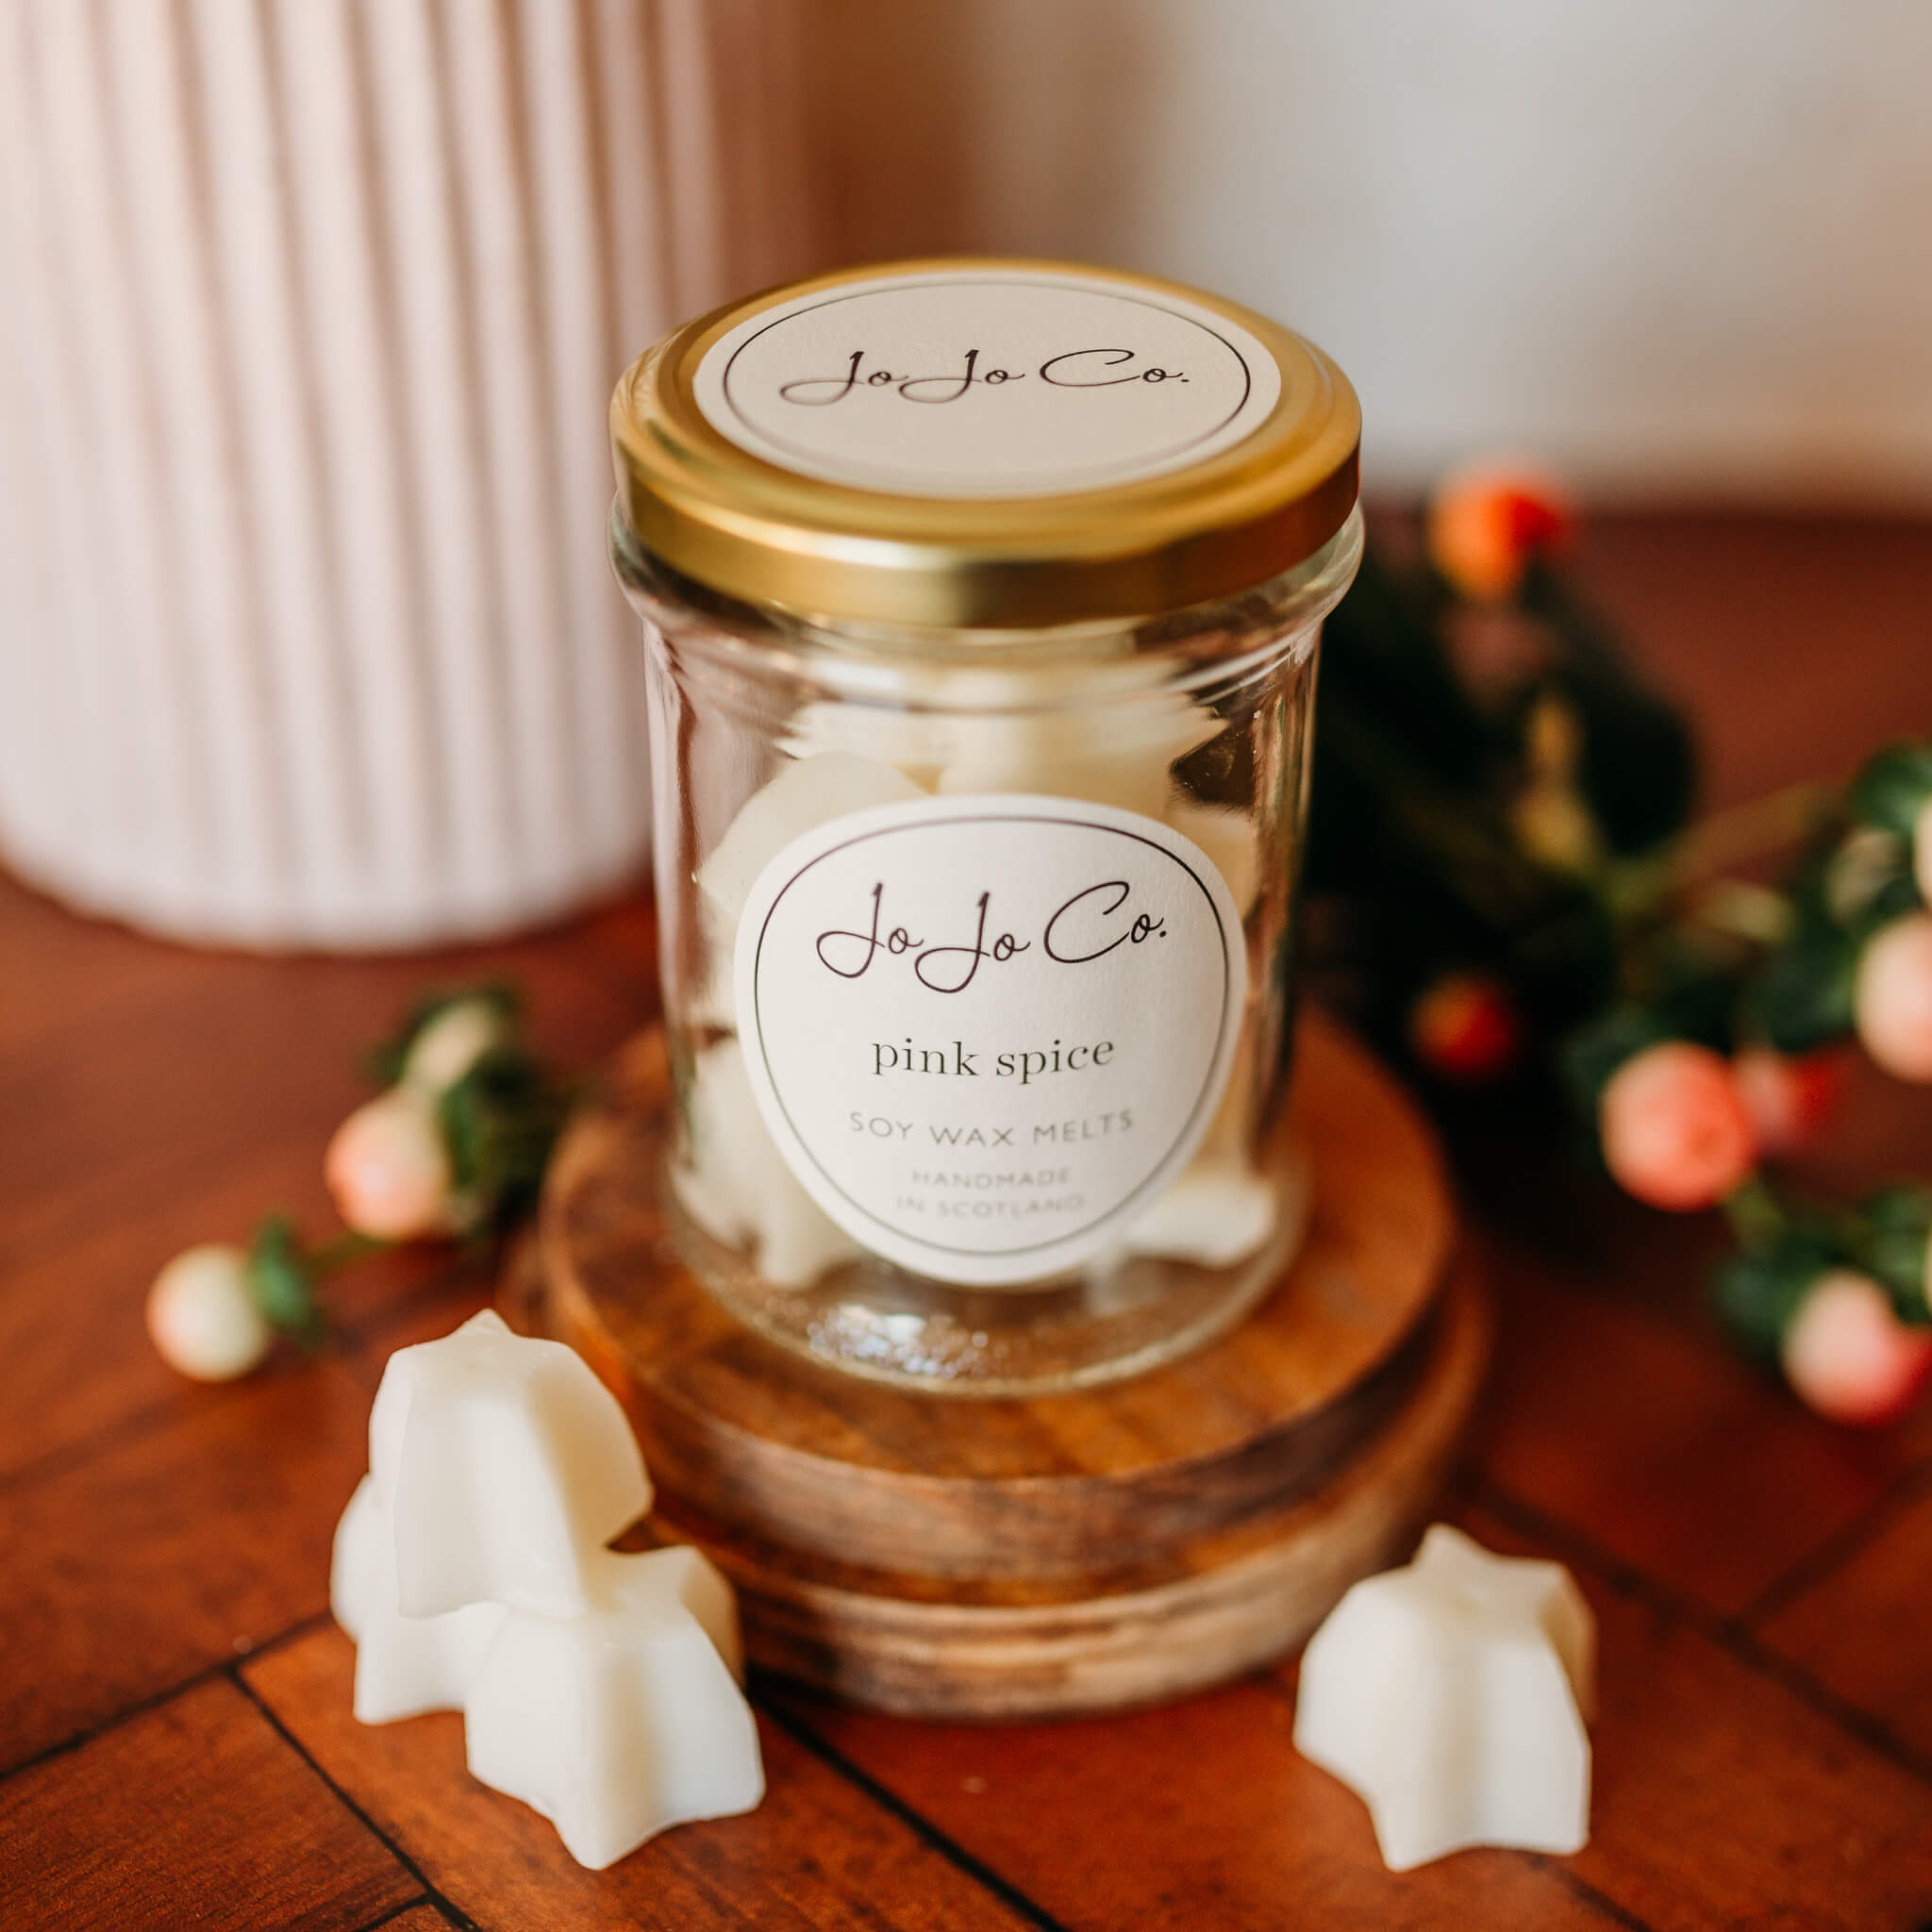 A glass jar with gold lid and white JoJo Co. label sits on a wooden base. White wax melt stars fill the jar and sit beside the jar. In the background are pink berries.